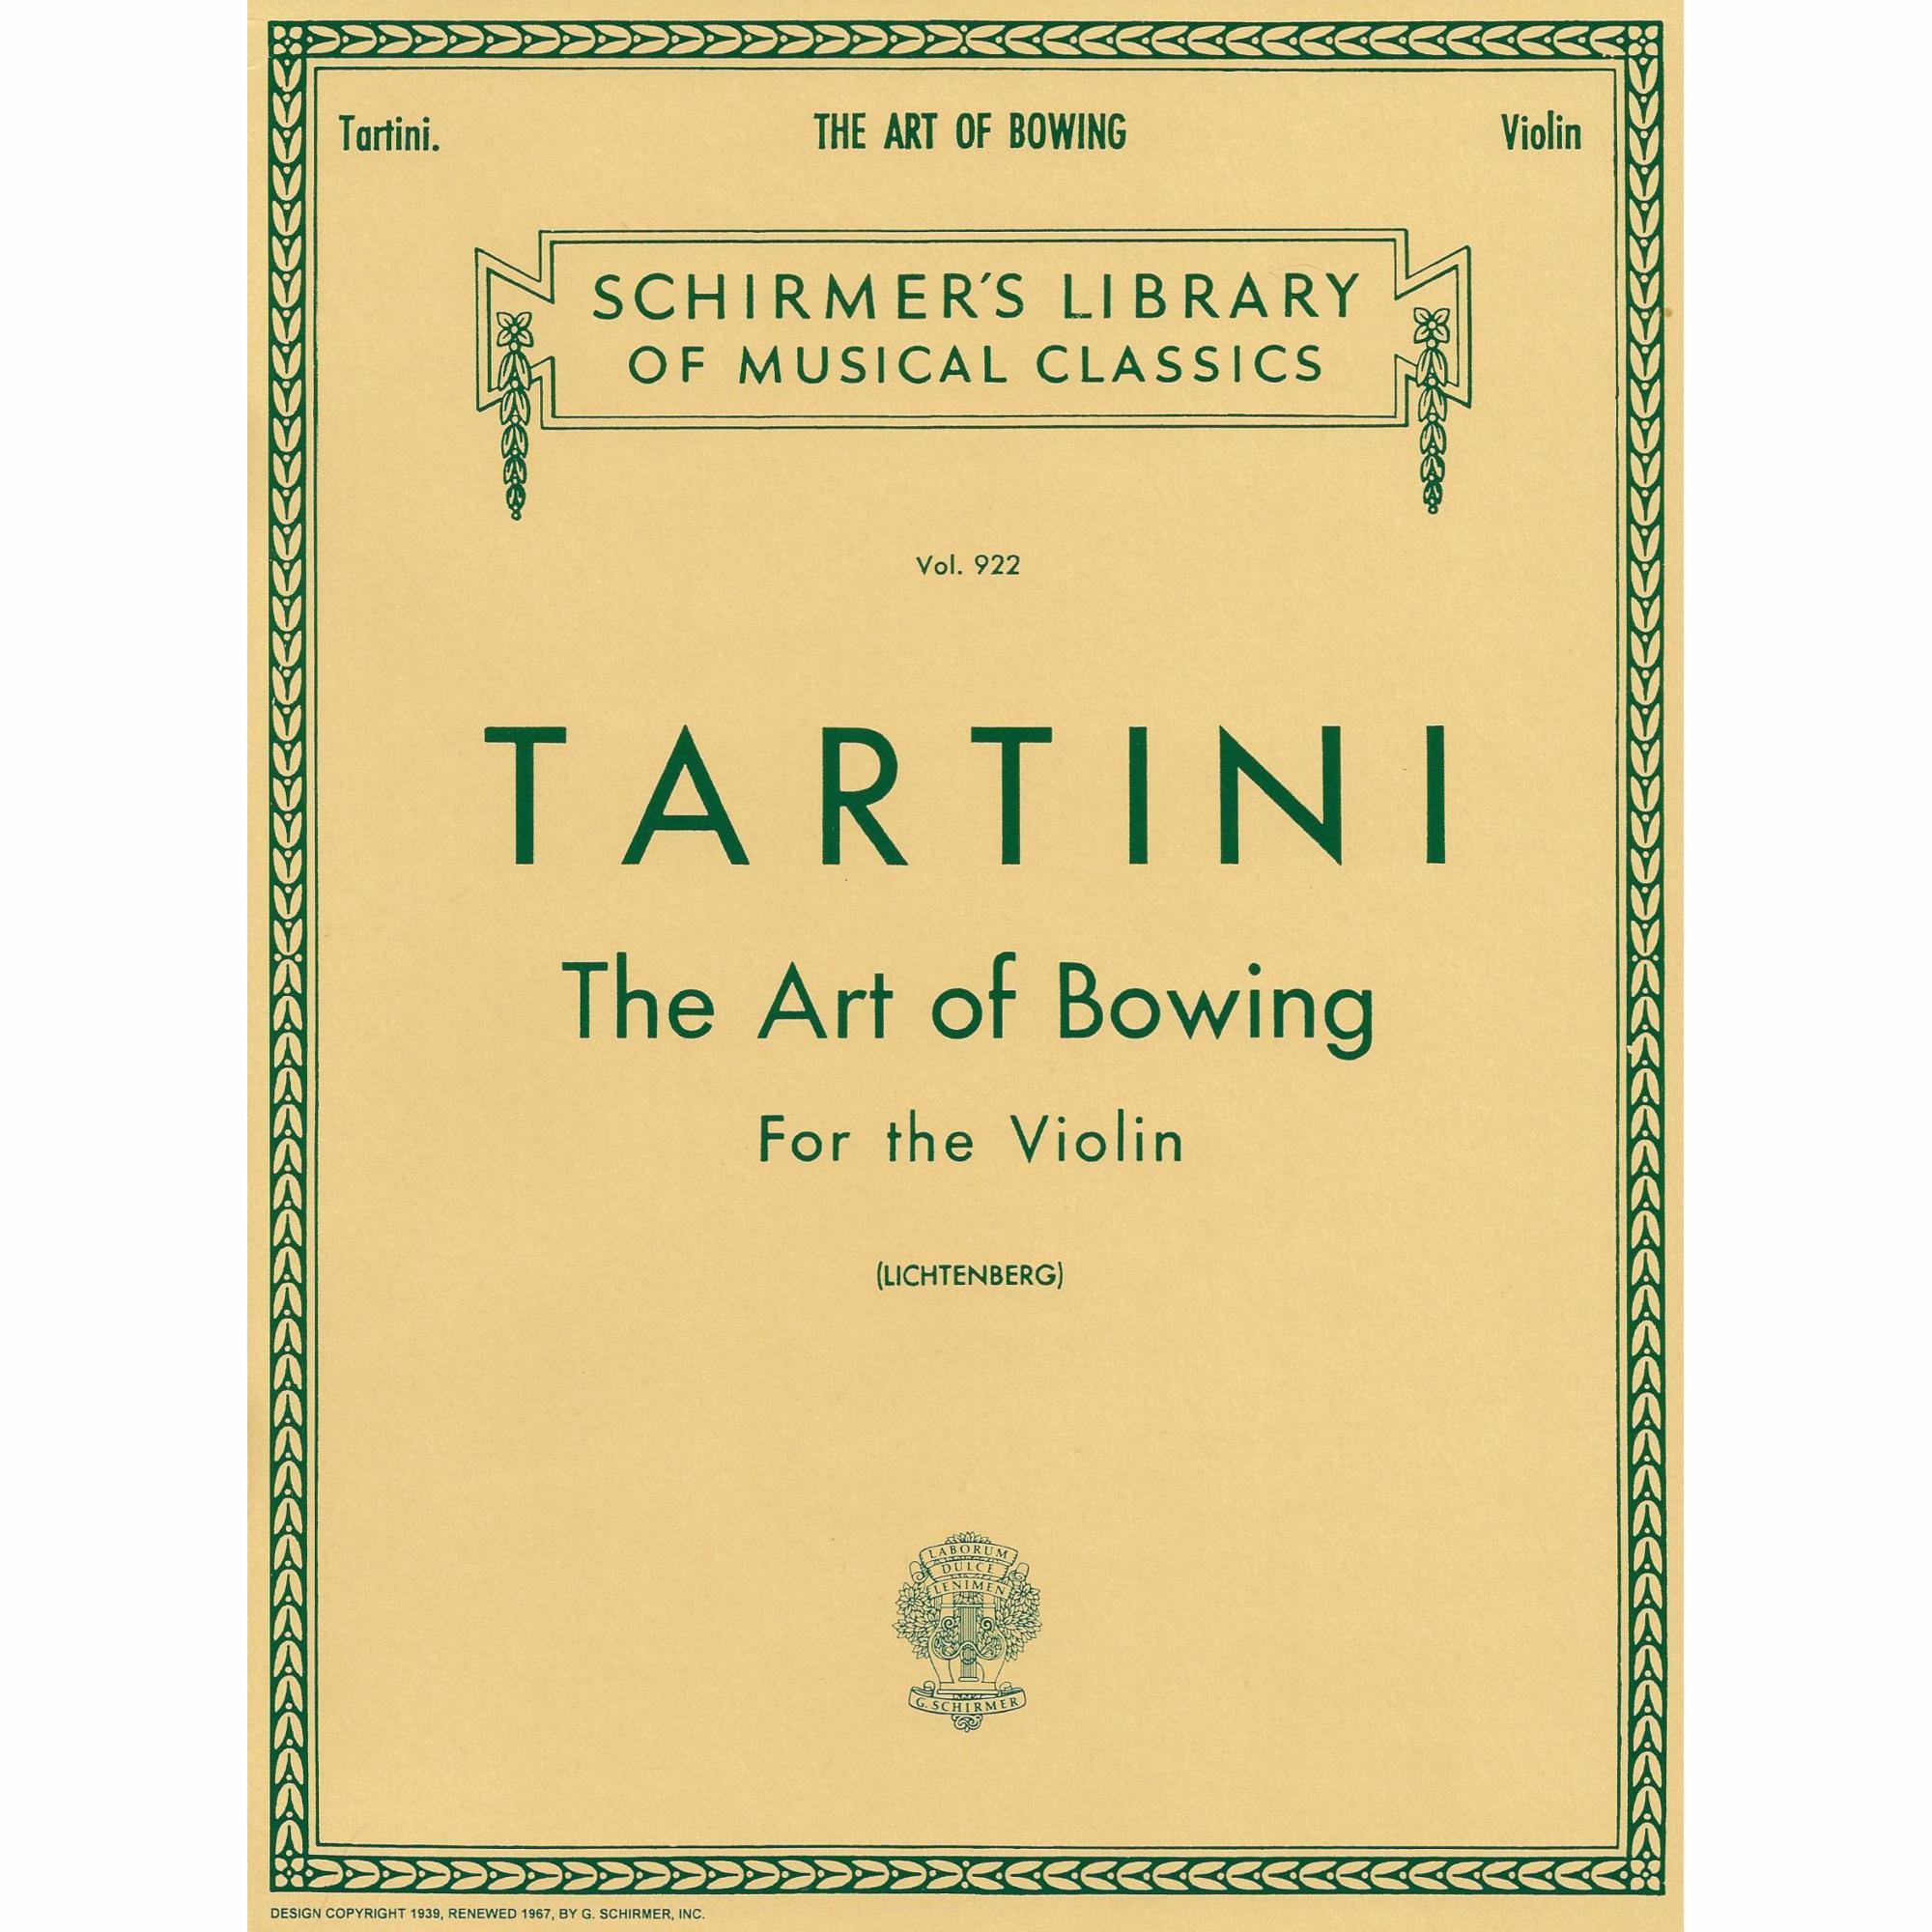 Tartini -- The Art of Bowing for Violin